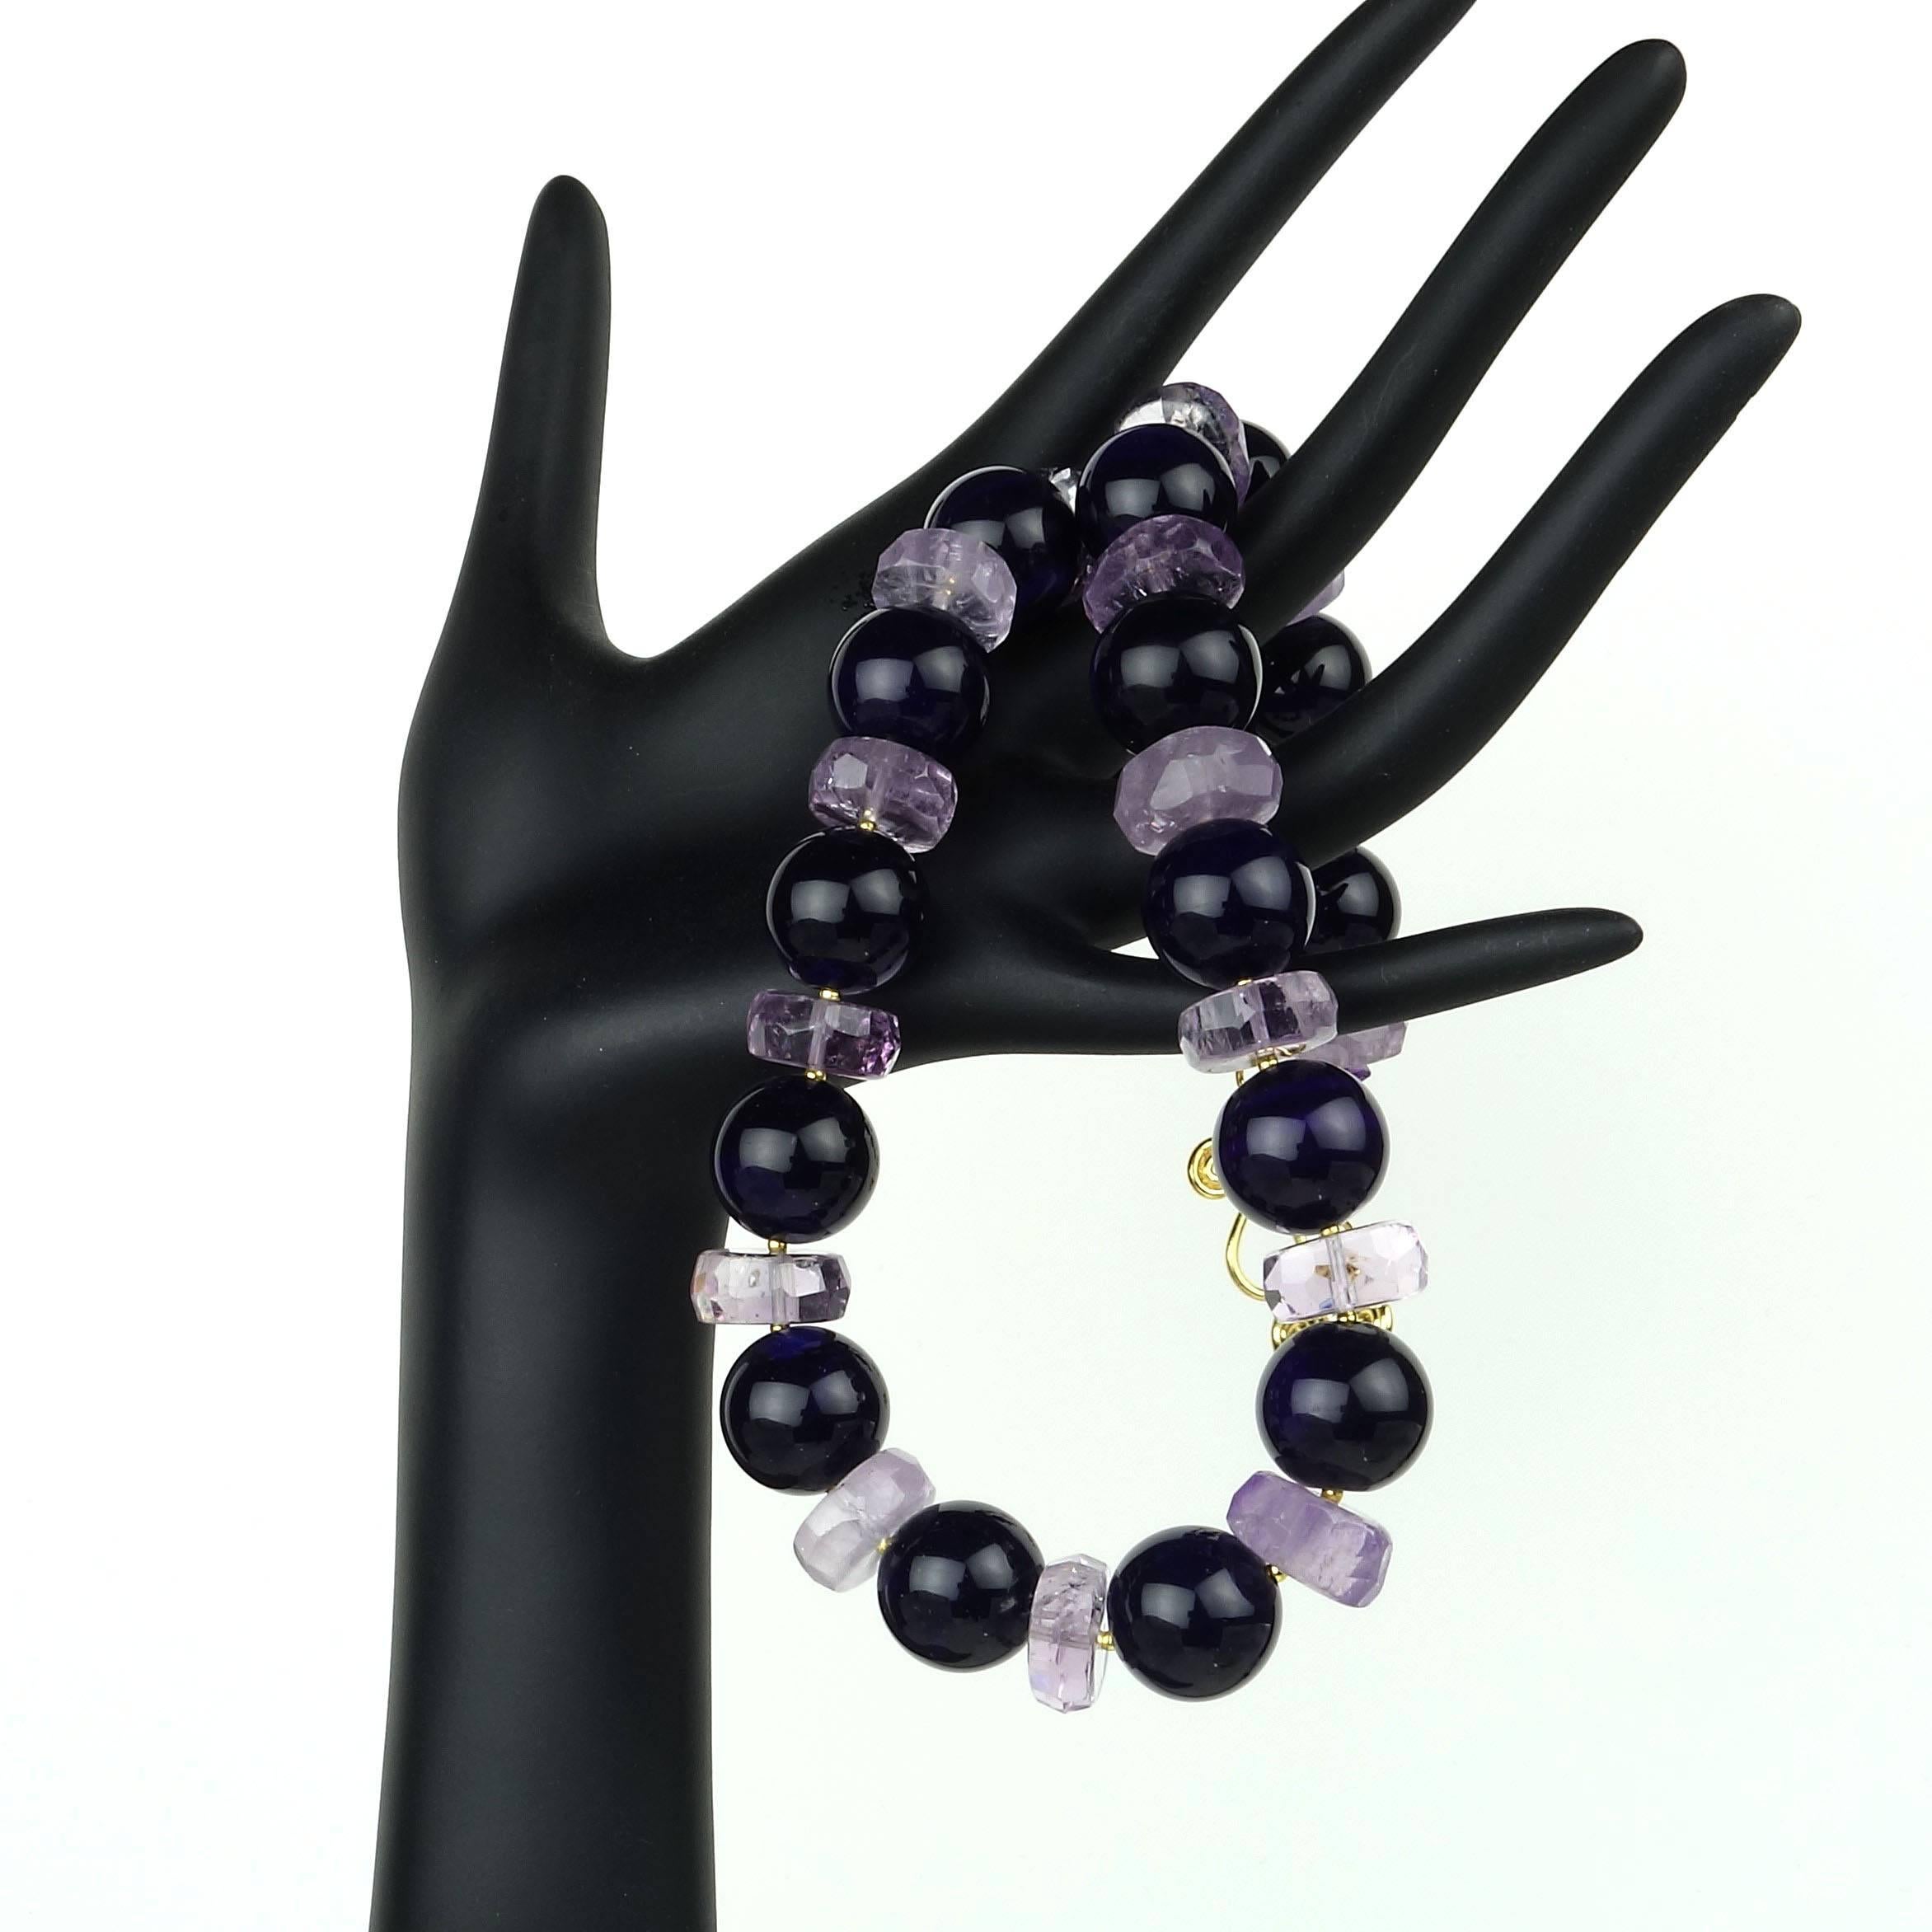 Facinating Rondels of Sparkling Amethyst alternating with 16mm spheres of opaque Amethyst in this statement necklace of 19.5 inches.  Tiny gold tone accents spacers and a scrolly 18kt plated clasp accent the amethysts.  Amethyst is the February